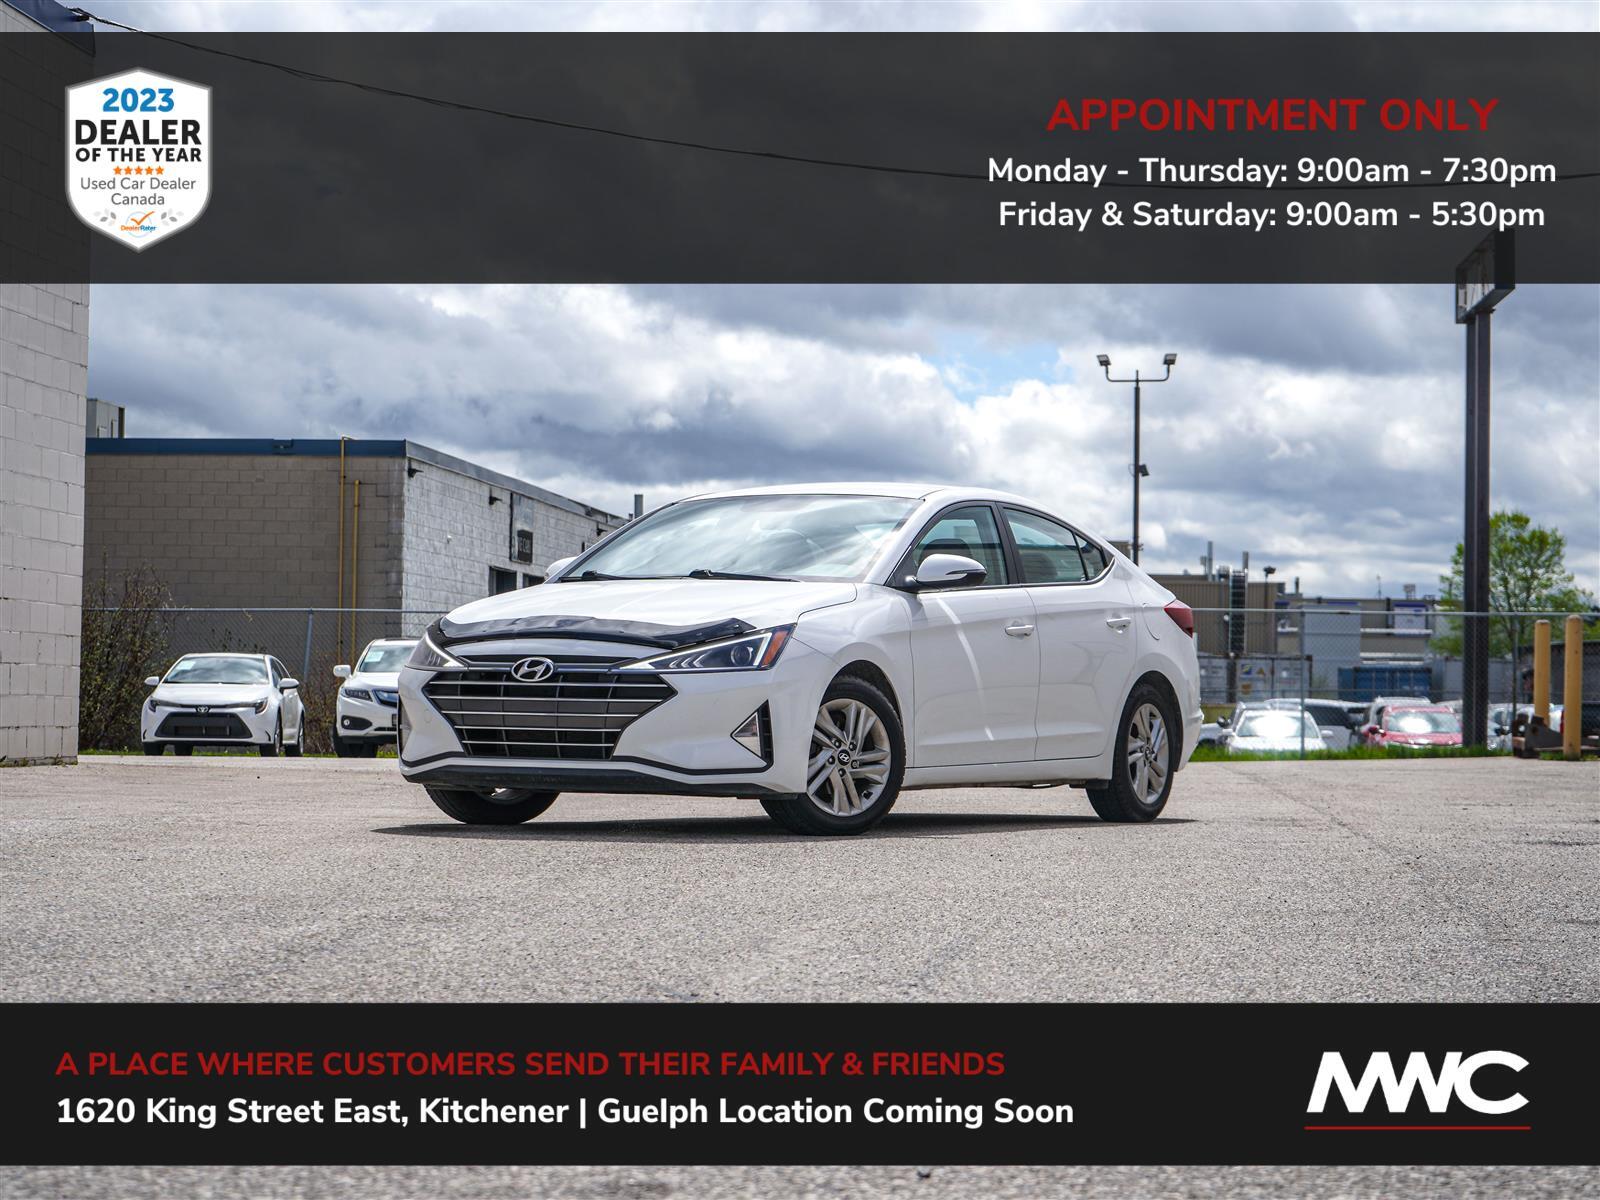 2019 Hyundai Elantra PREFERRED | 17 IN GUELPH, BY APPT. ONLY